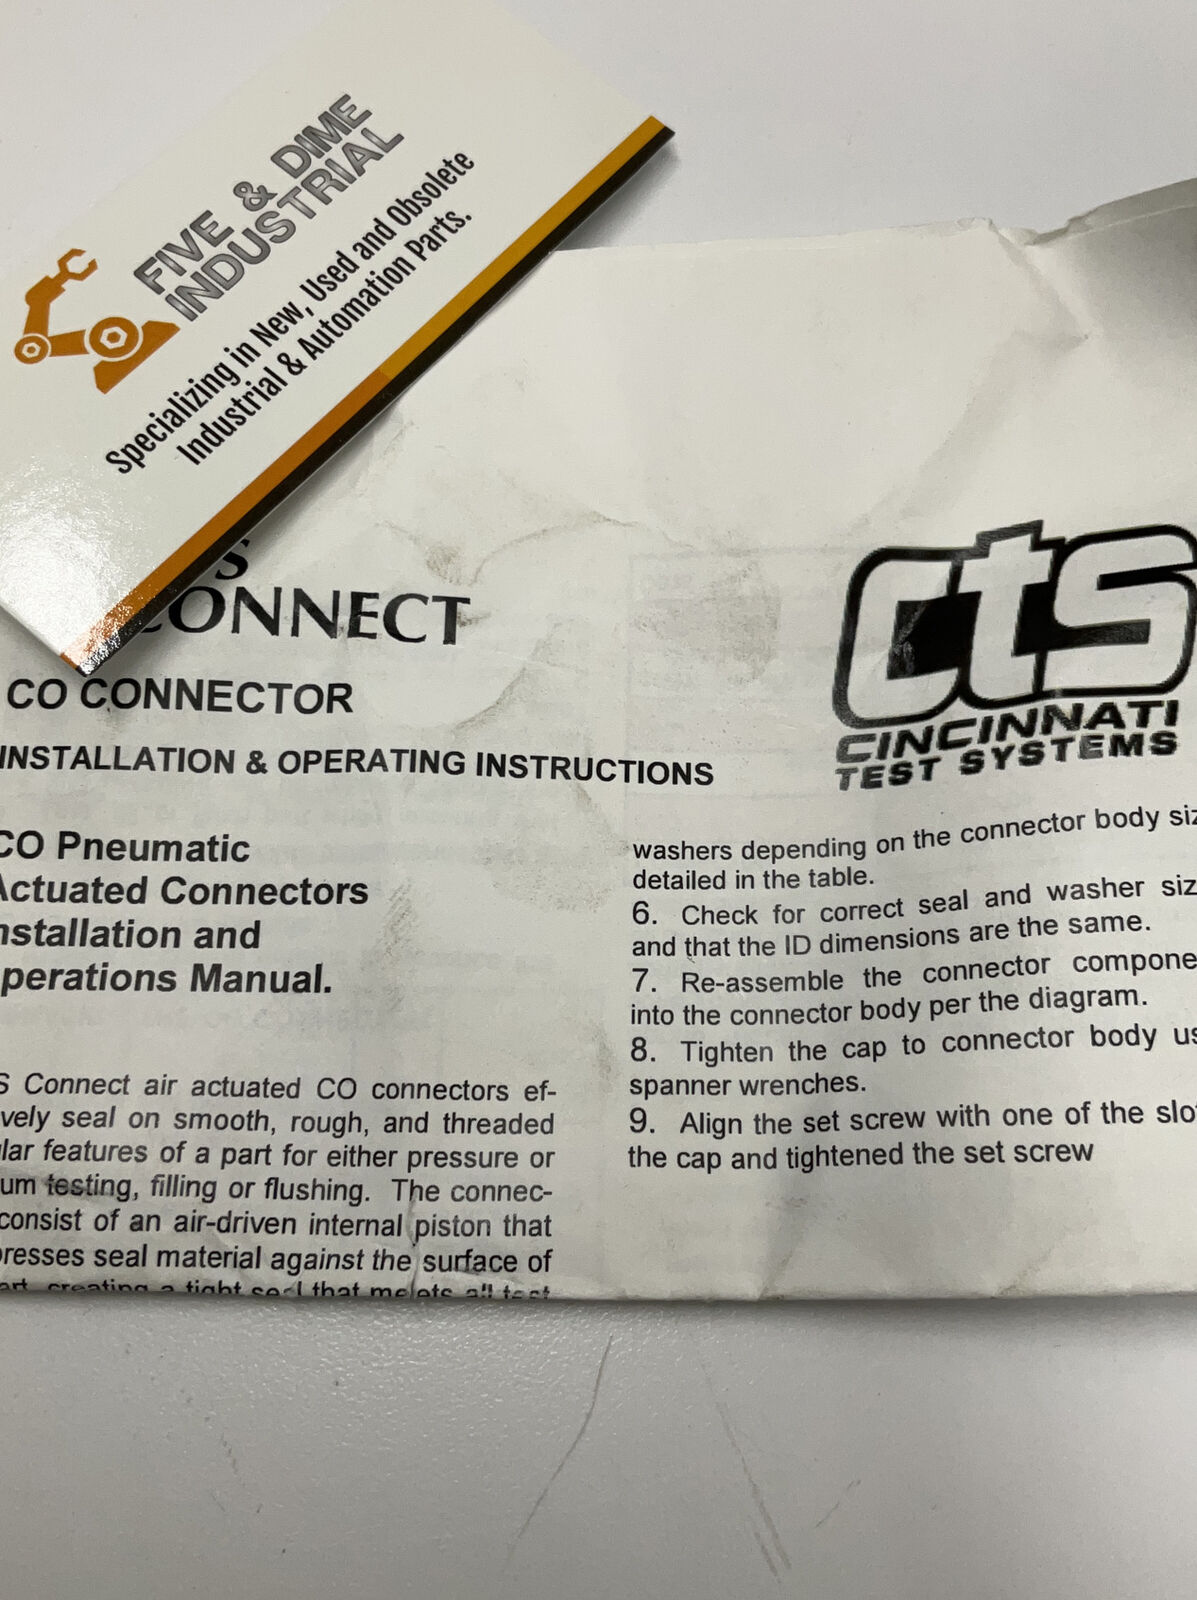 Cincinnati Test Systems CTS CO32-2014329 New CO Connector  CO32 (YE203)